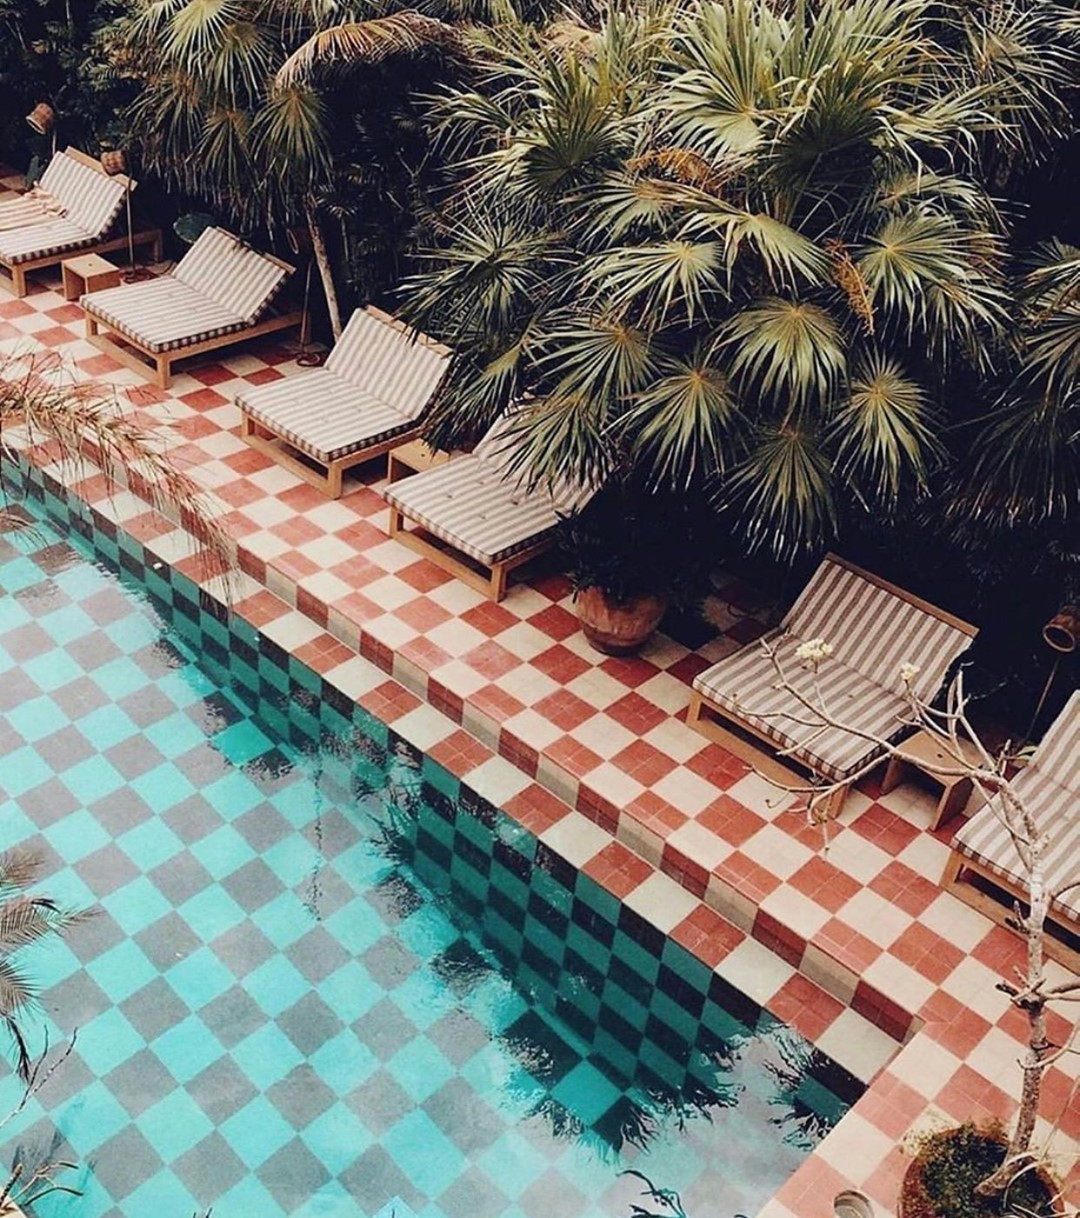 Charo Ruiz Ibiza - Digital content creator and globetrotter @liveranilorenzo brings us a vantage point overlooking the interior of a beautiful garden pool in Tulum. Comfort in this space is related to...